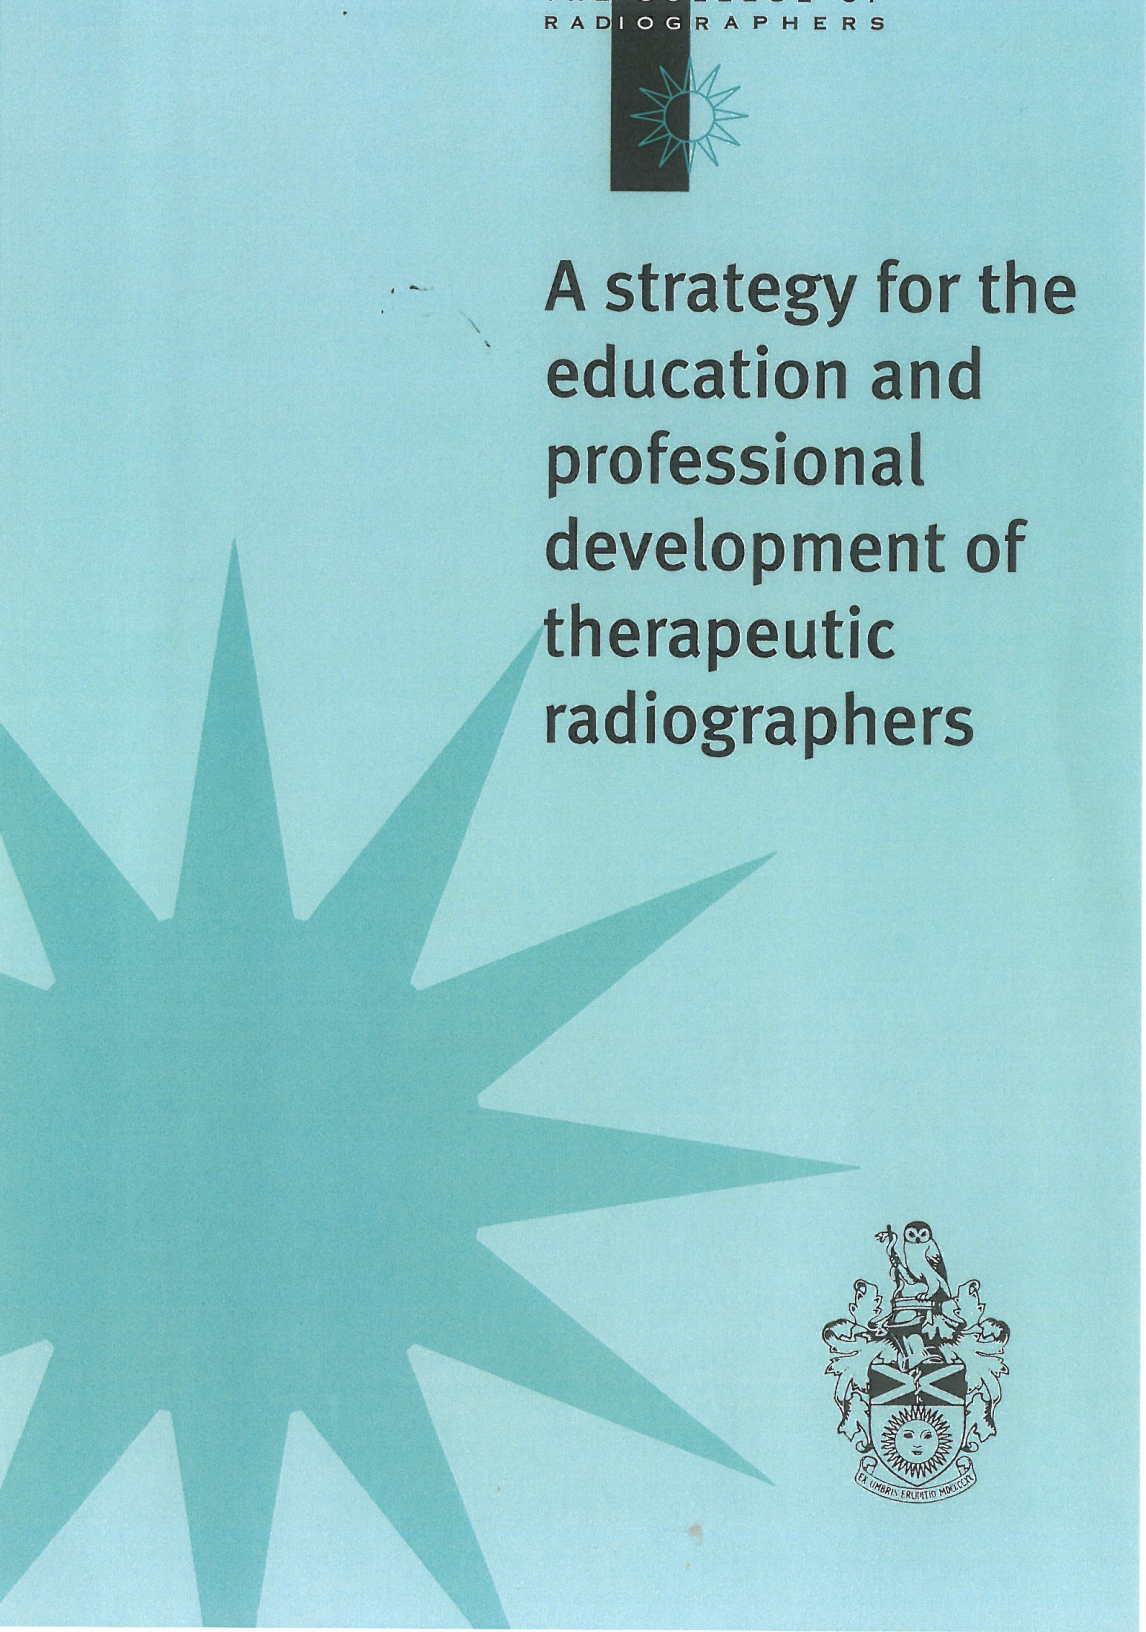 A Strategy for the Education and Professional Development of Therapeutic Radiographers